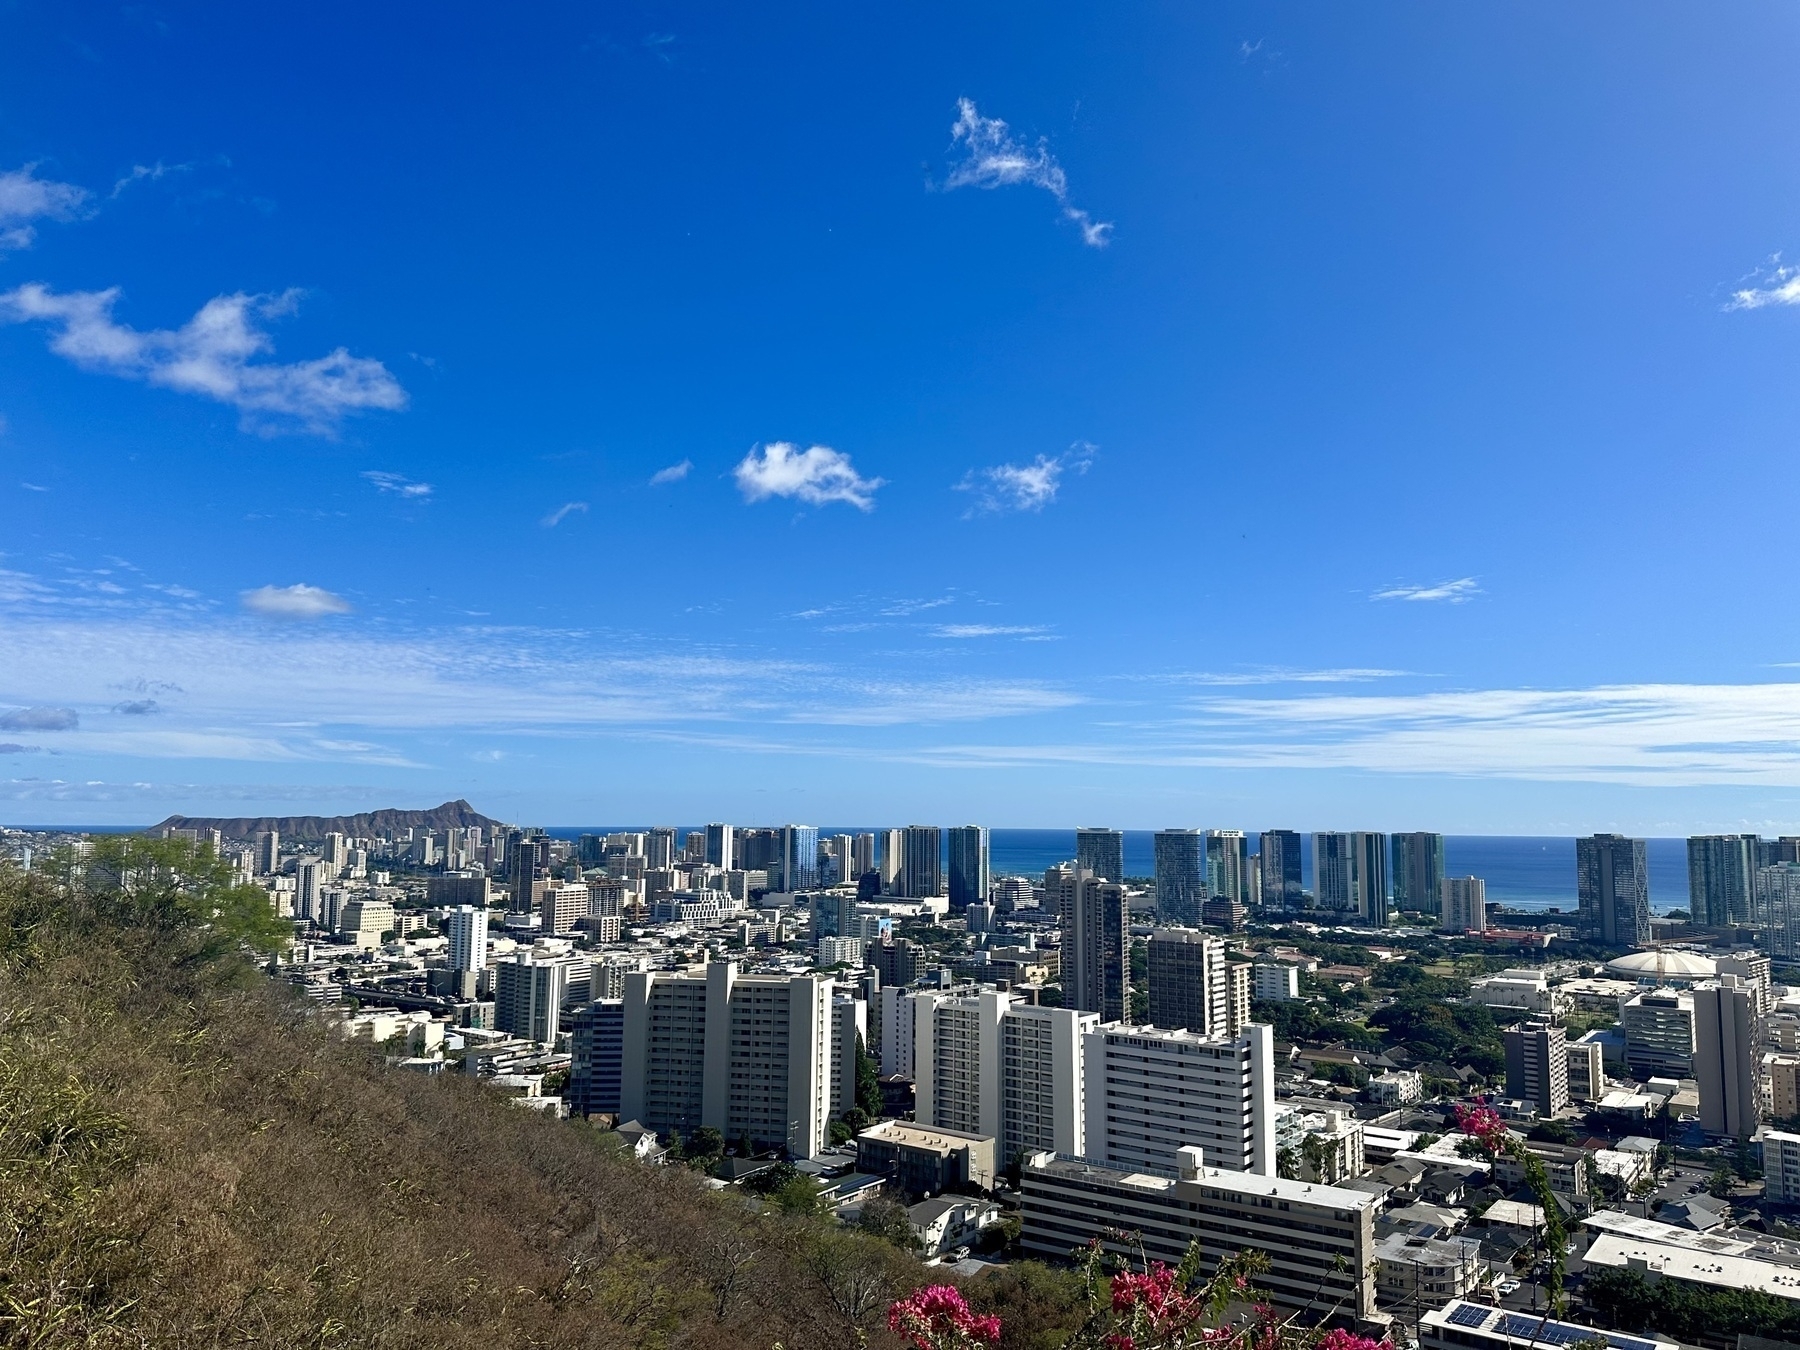 Honolulu skyline as seen from the elevated National Memorial Cemetery of the Pacific.